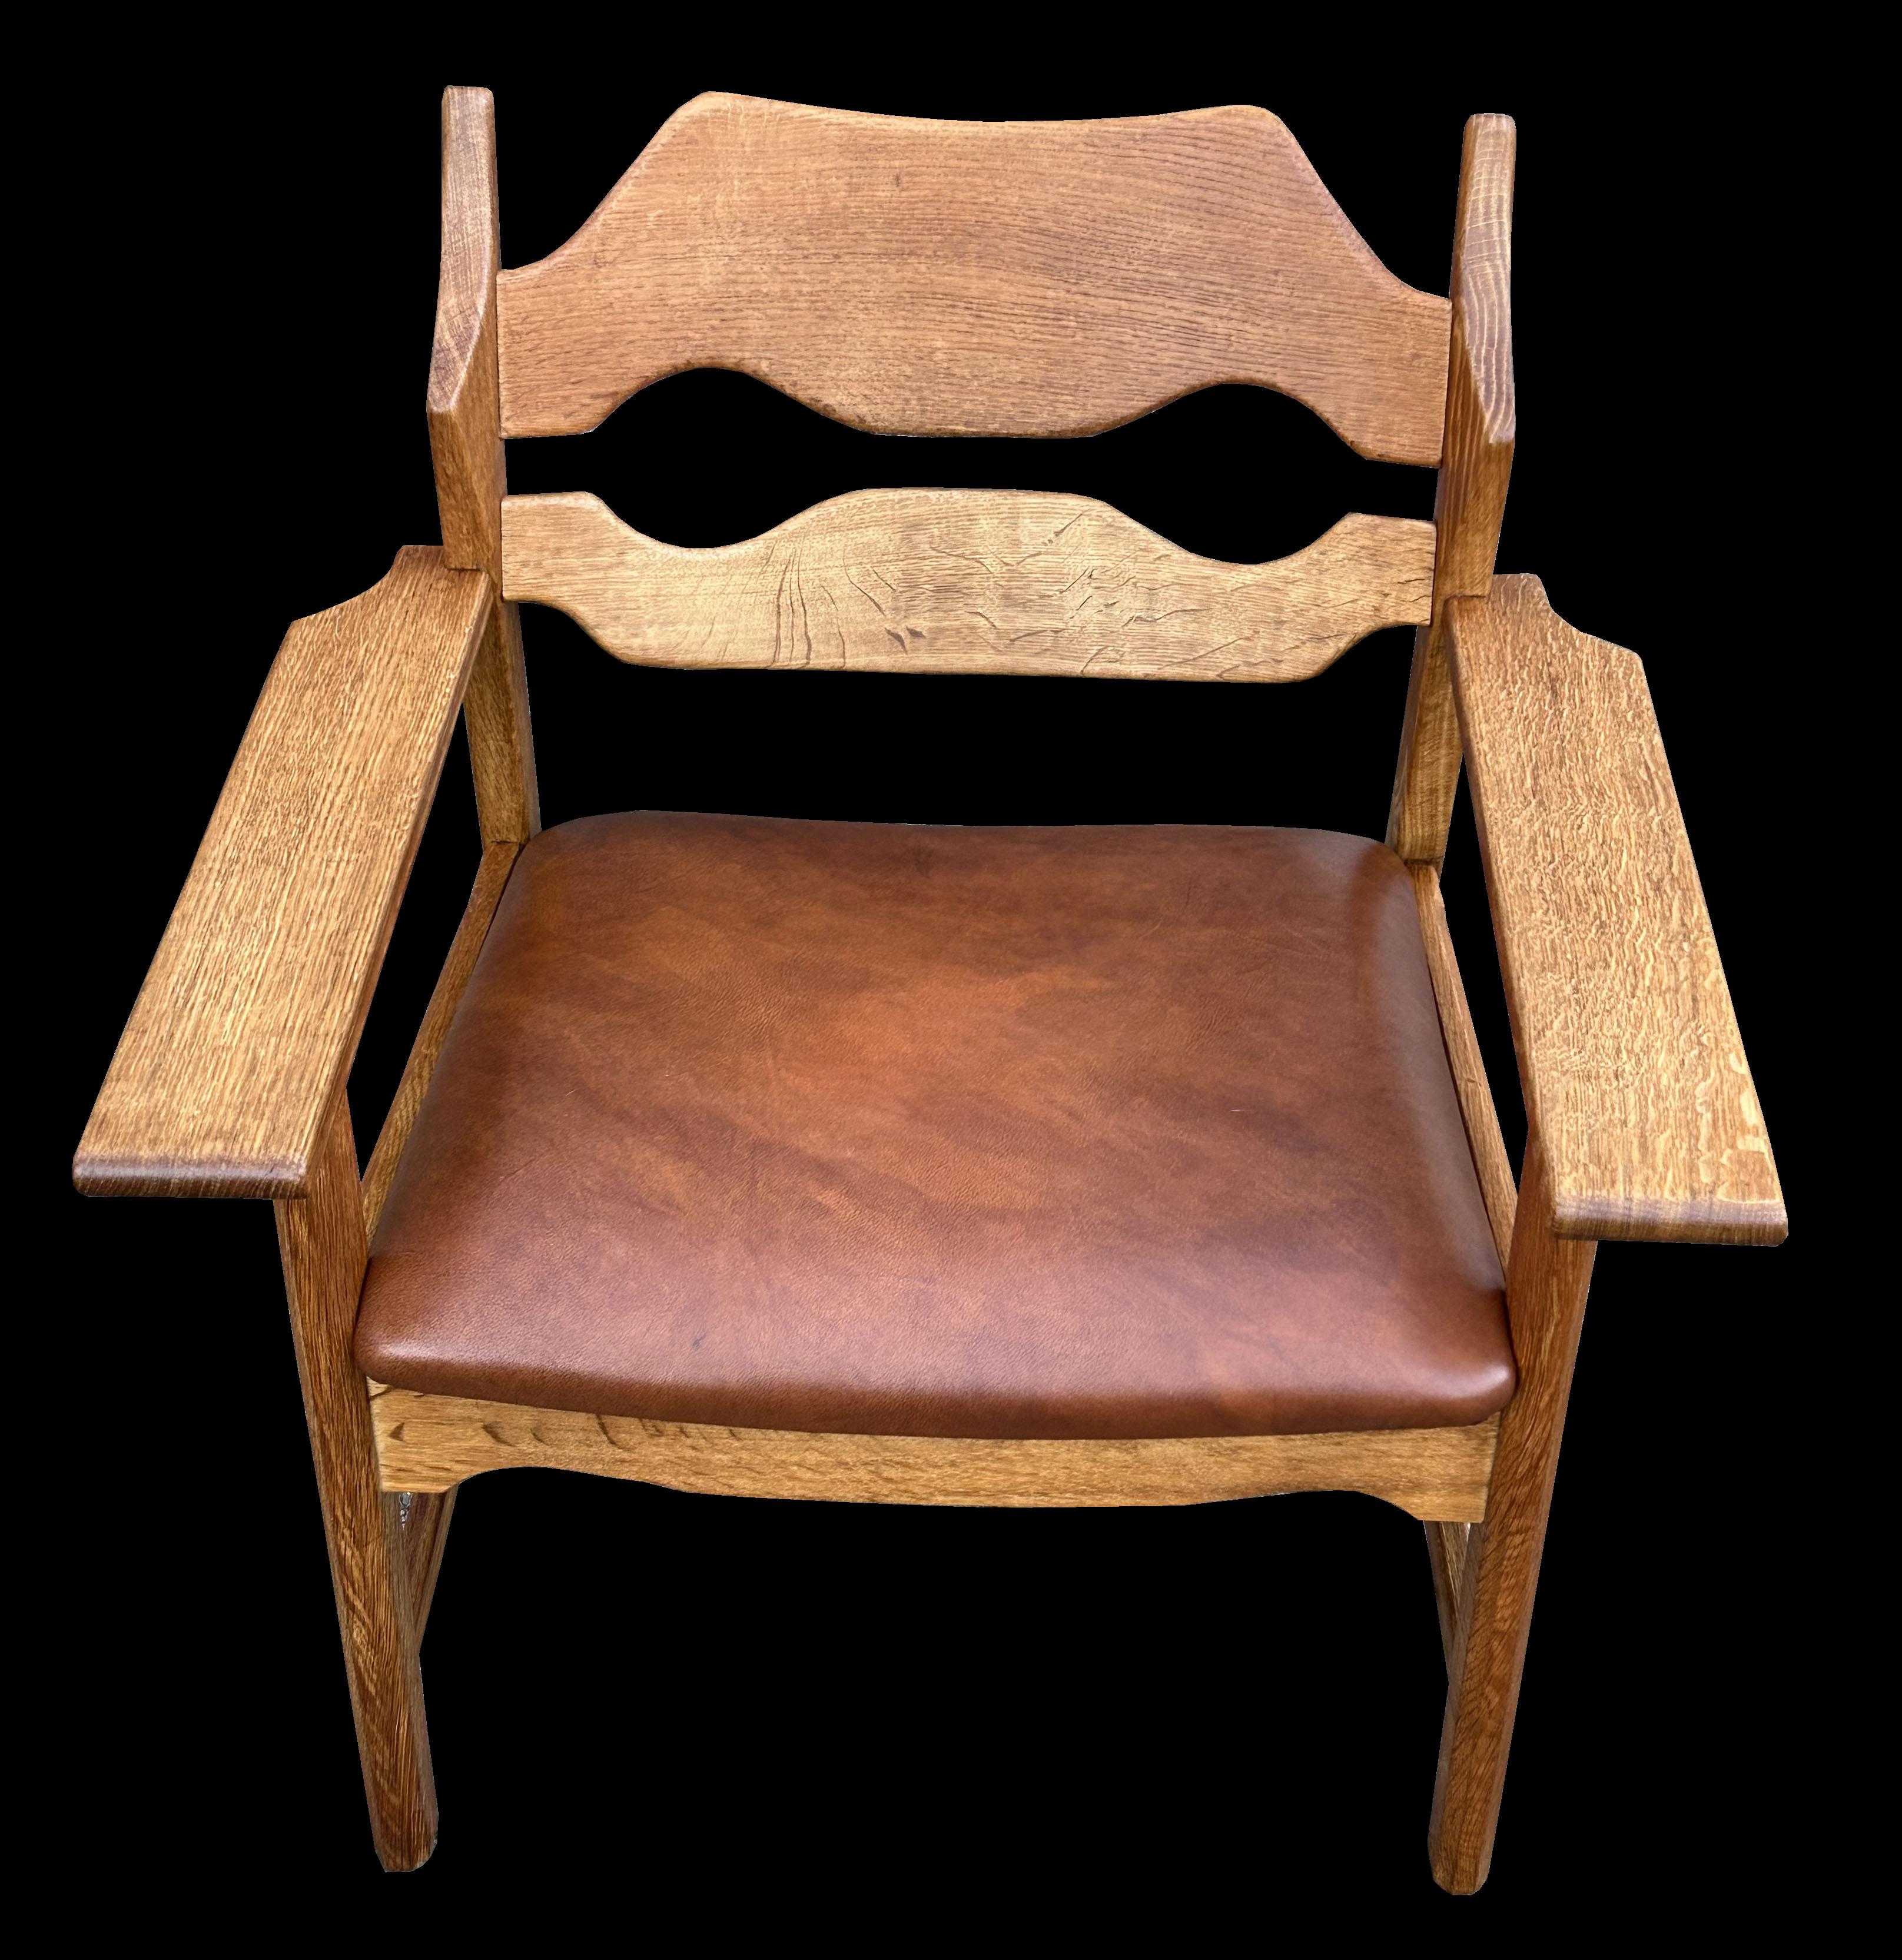 This is a very good original example of this very stylish Lounge chair in nicely patinated Oak with leather seat.